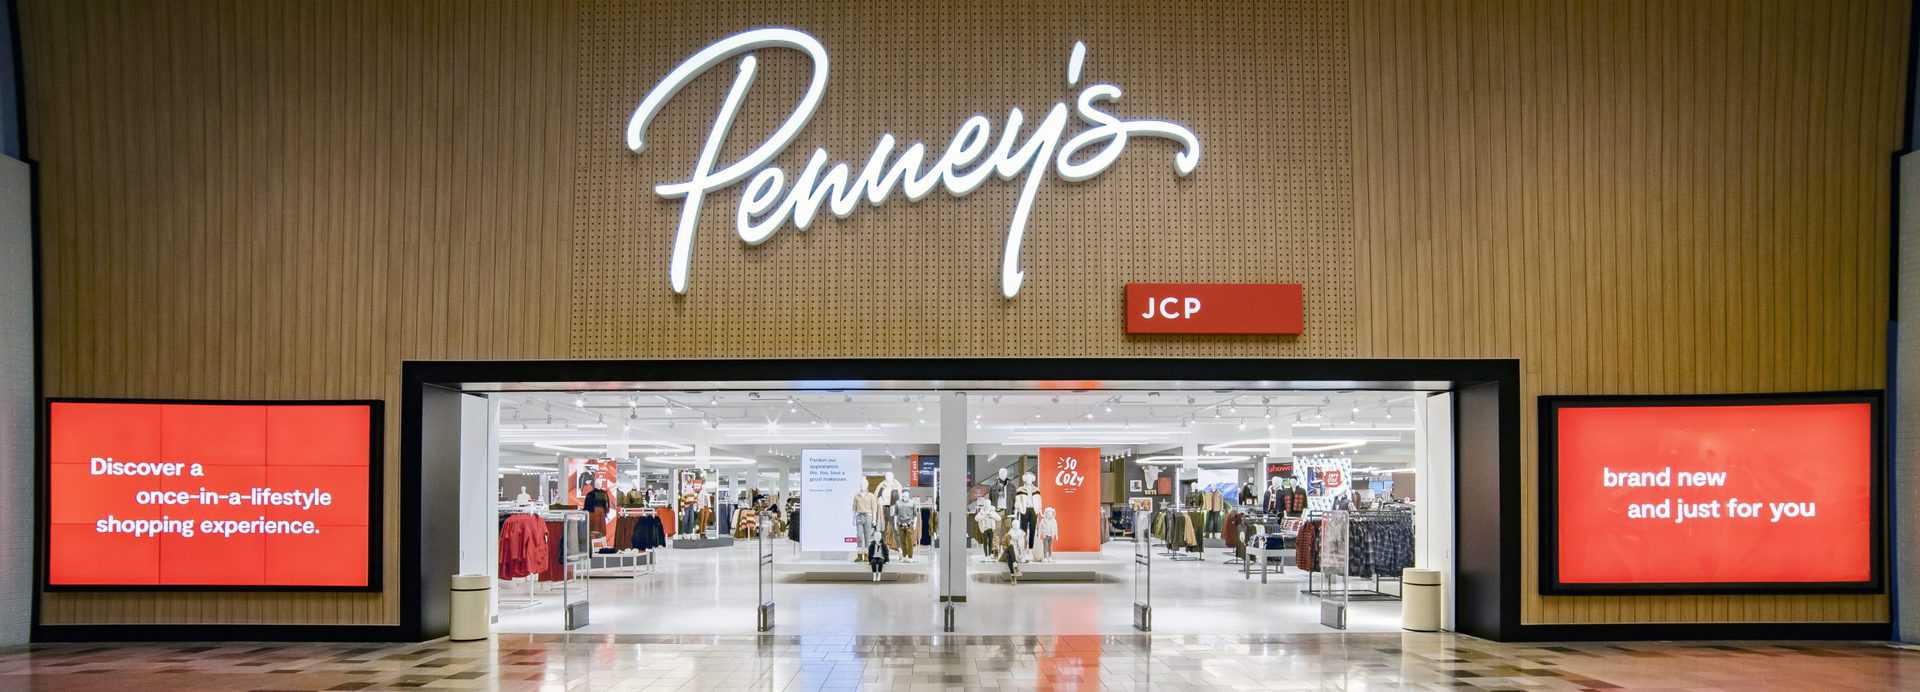 JCPenney CEO Marc Rosen's Playbook for Transformation